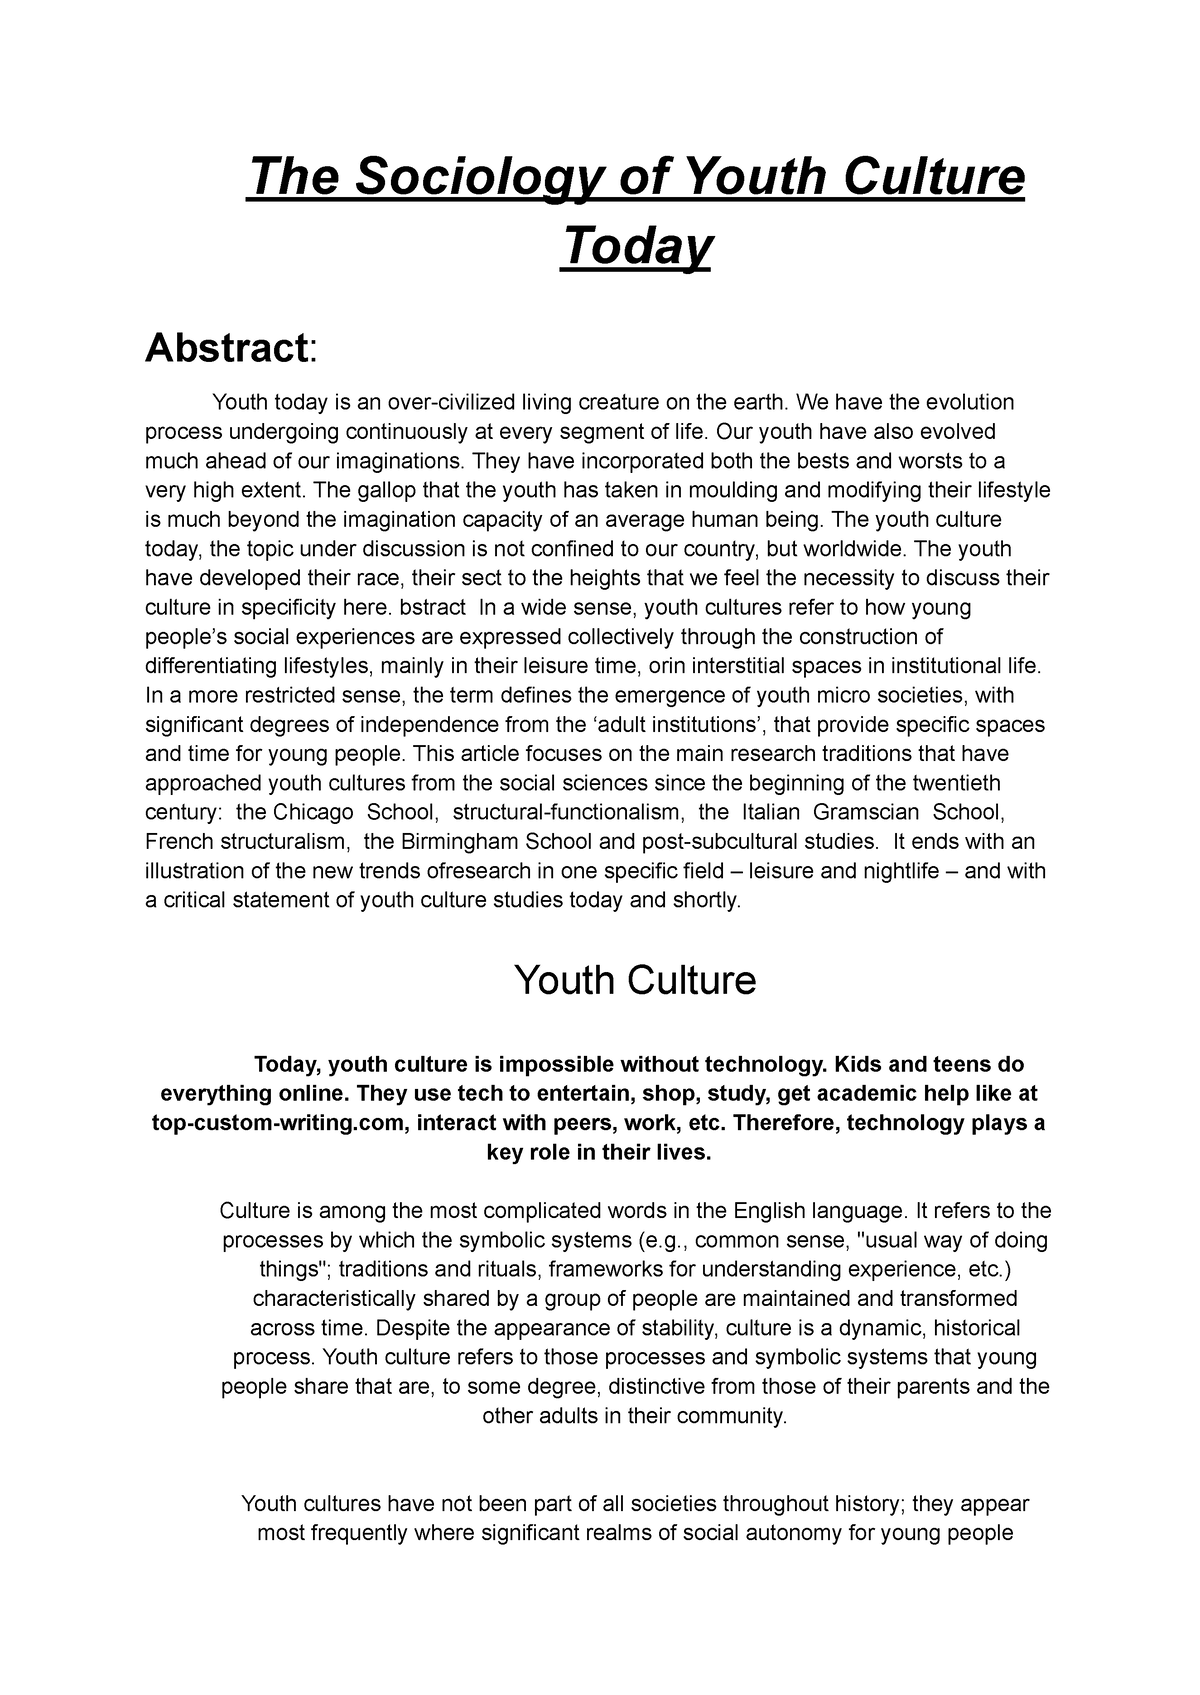 essay on youth culture today